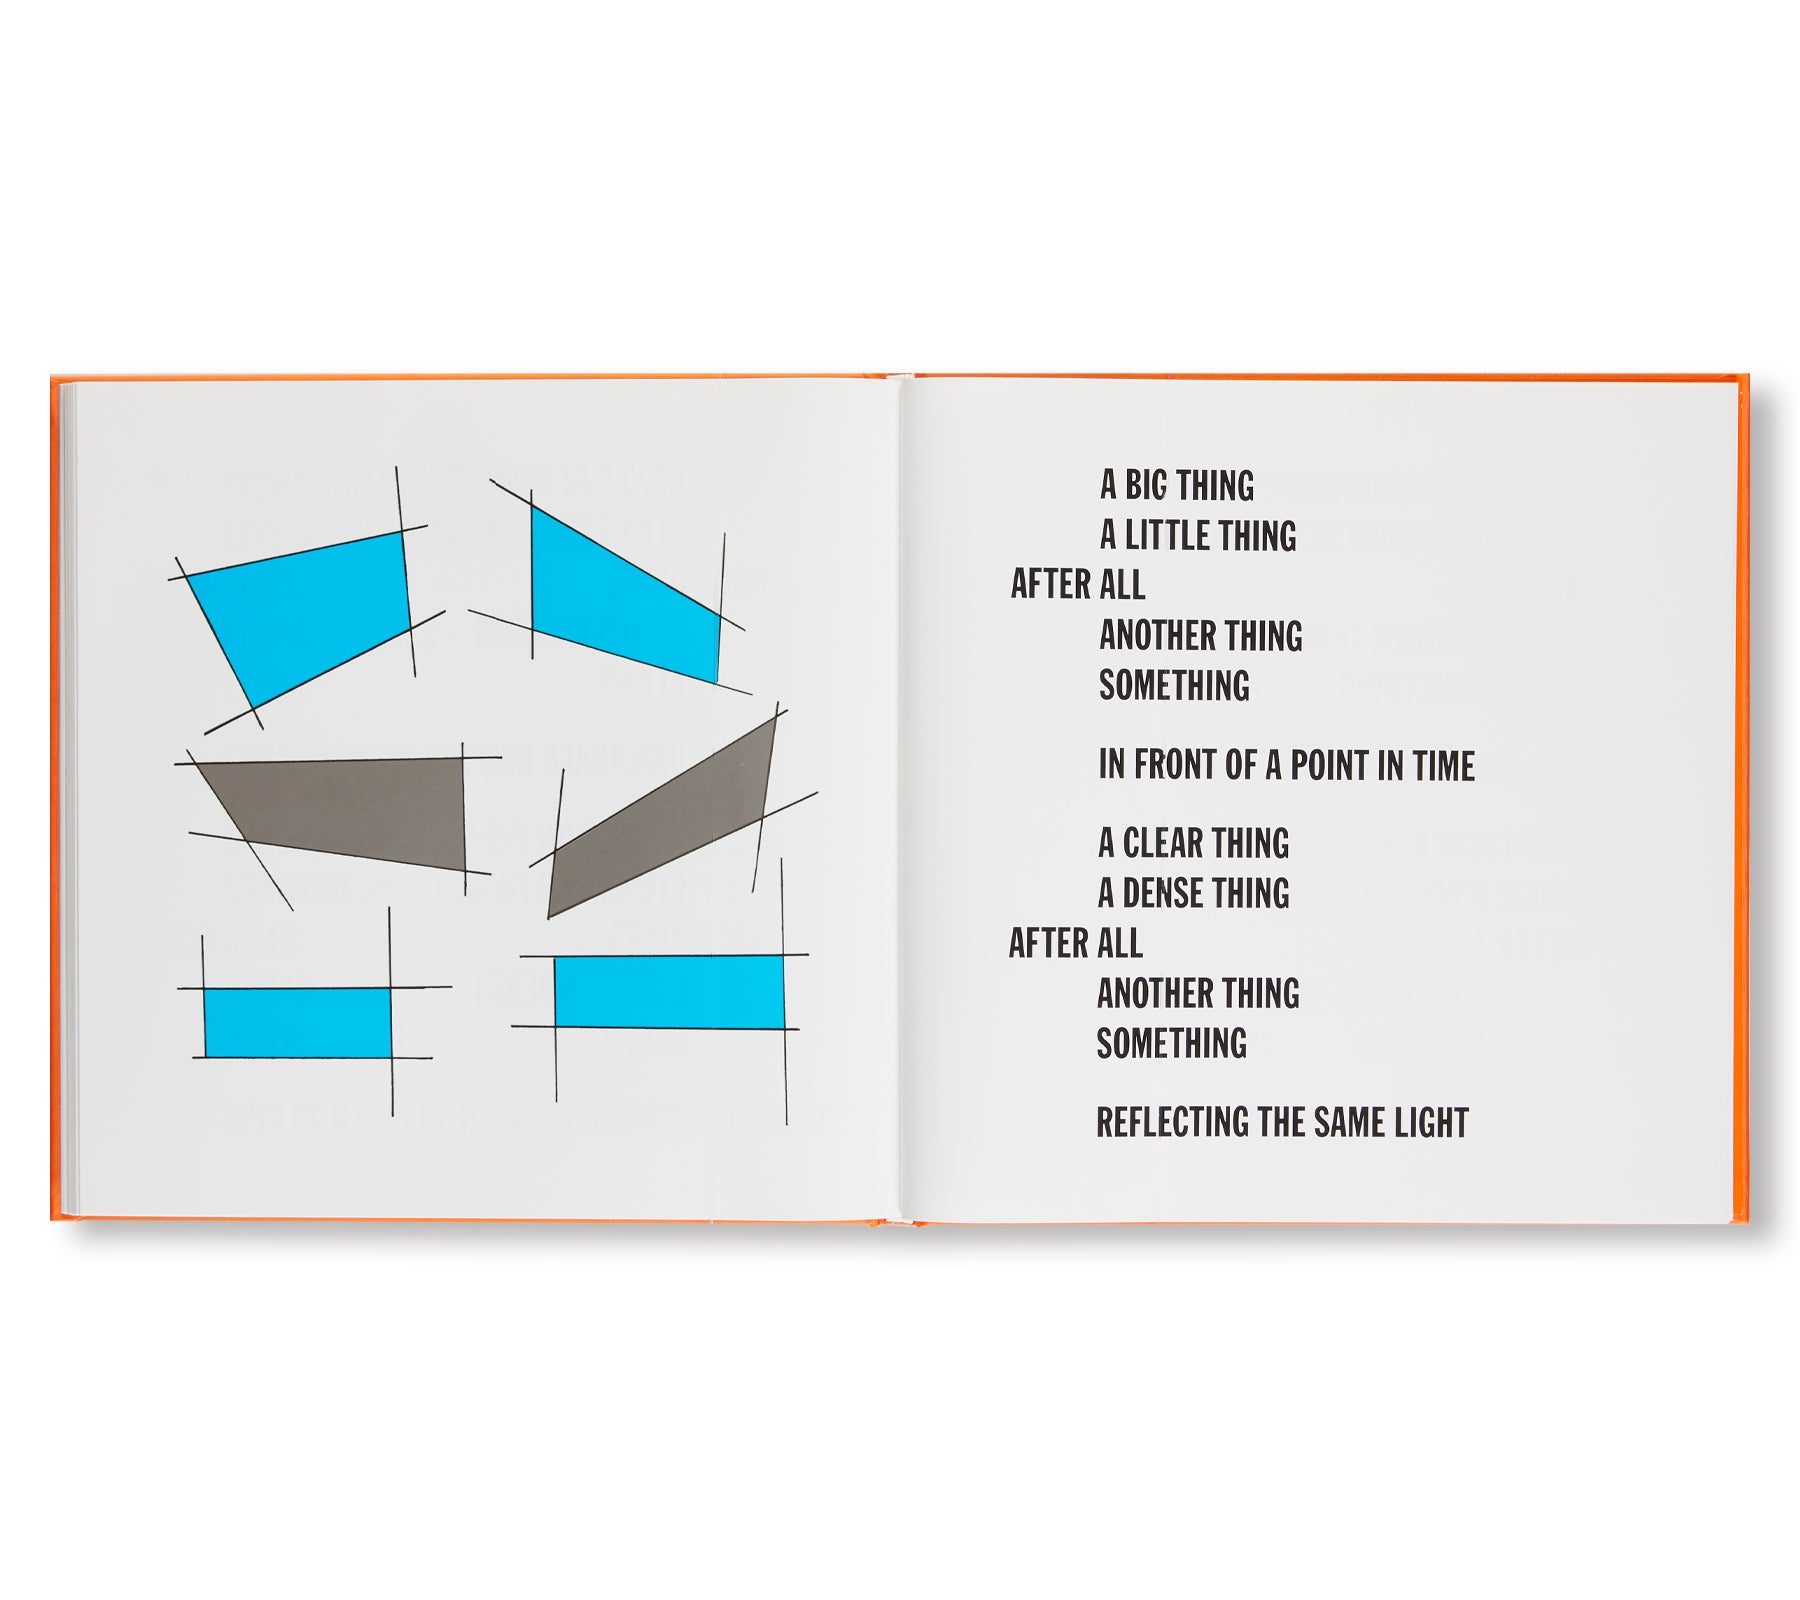 NACH ALLES / AFTER ALL by Lawrence Weiner